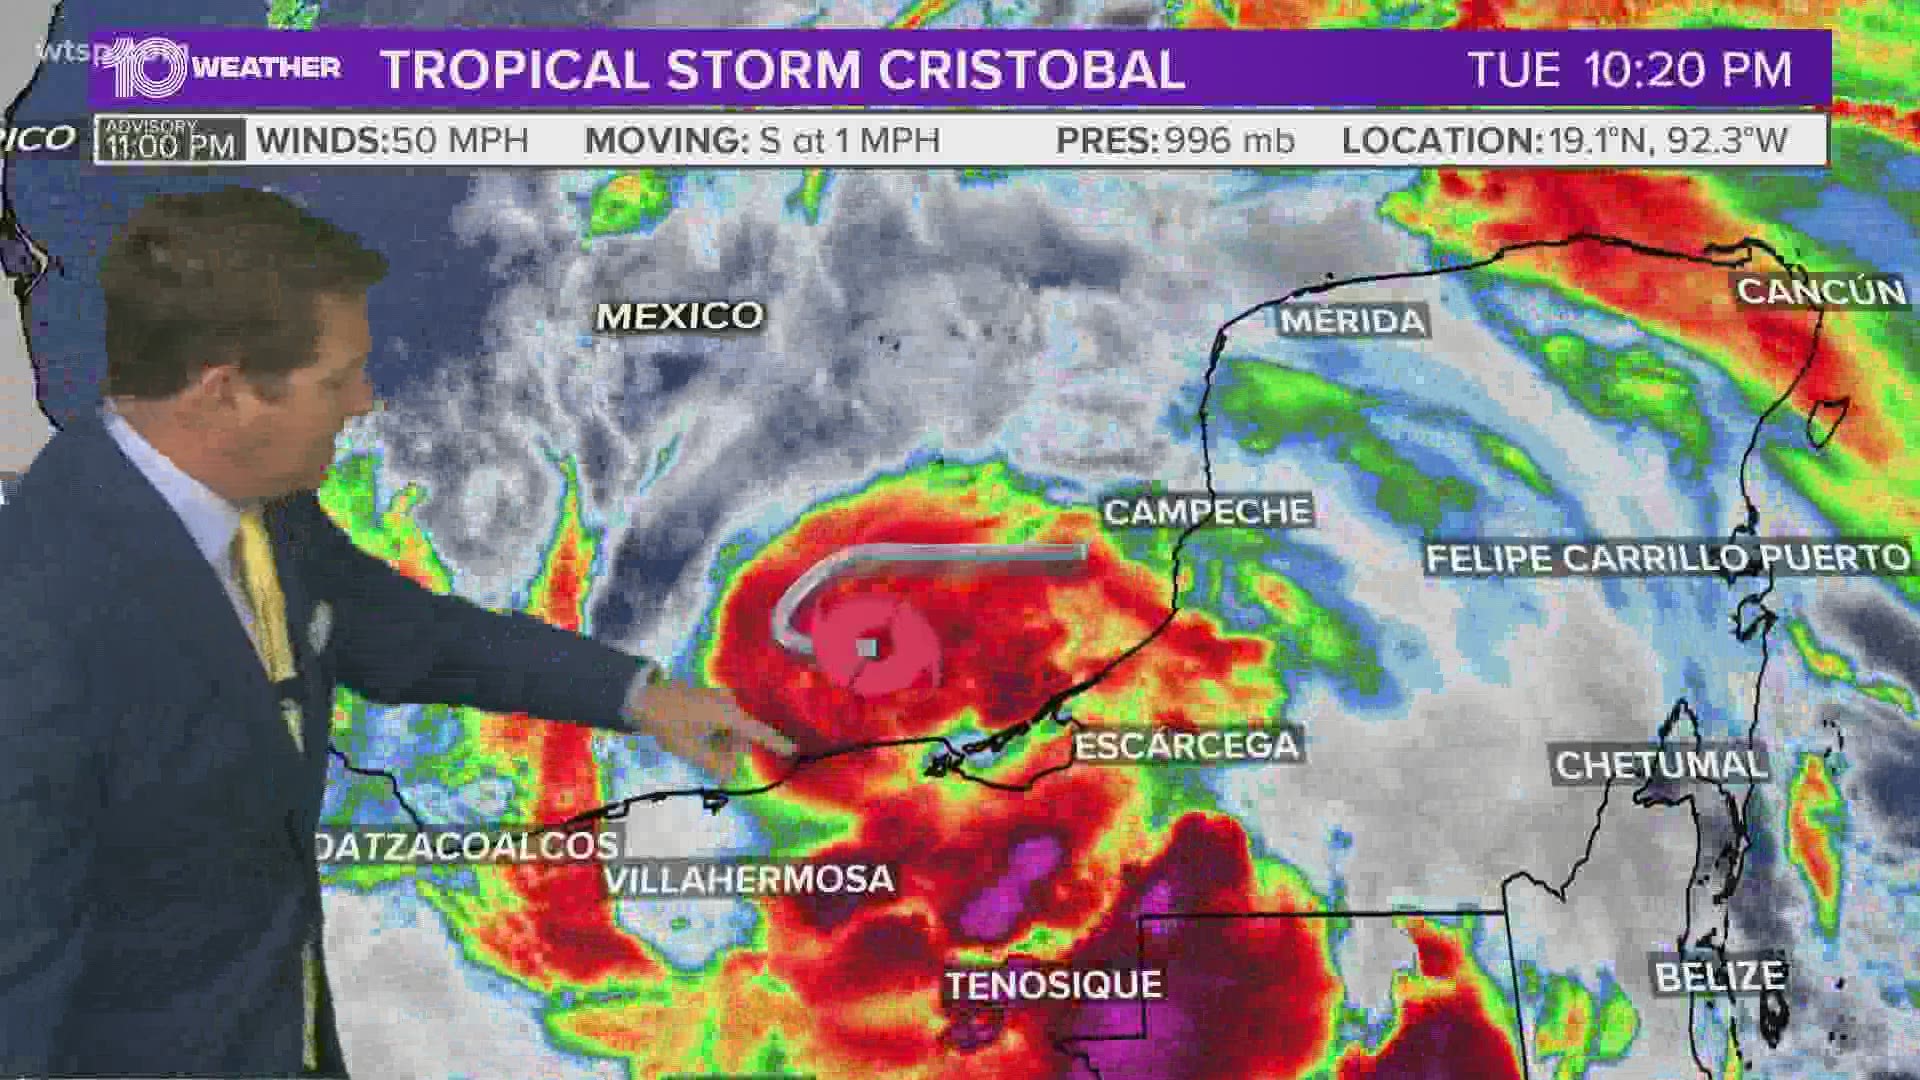 It is a 50-mph storm in the Bay of Campeche, according to the latest advisory by the National Hurricane Center.